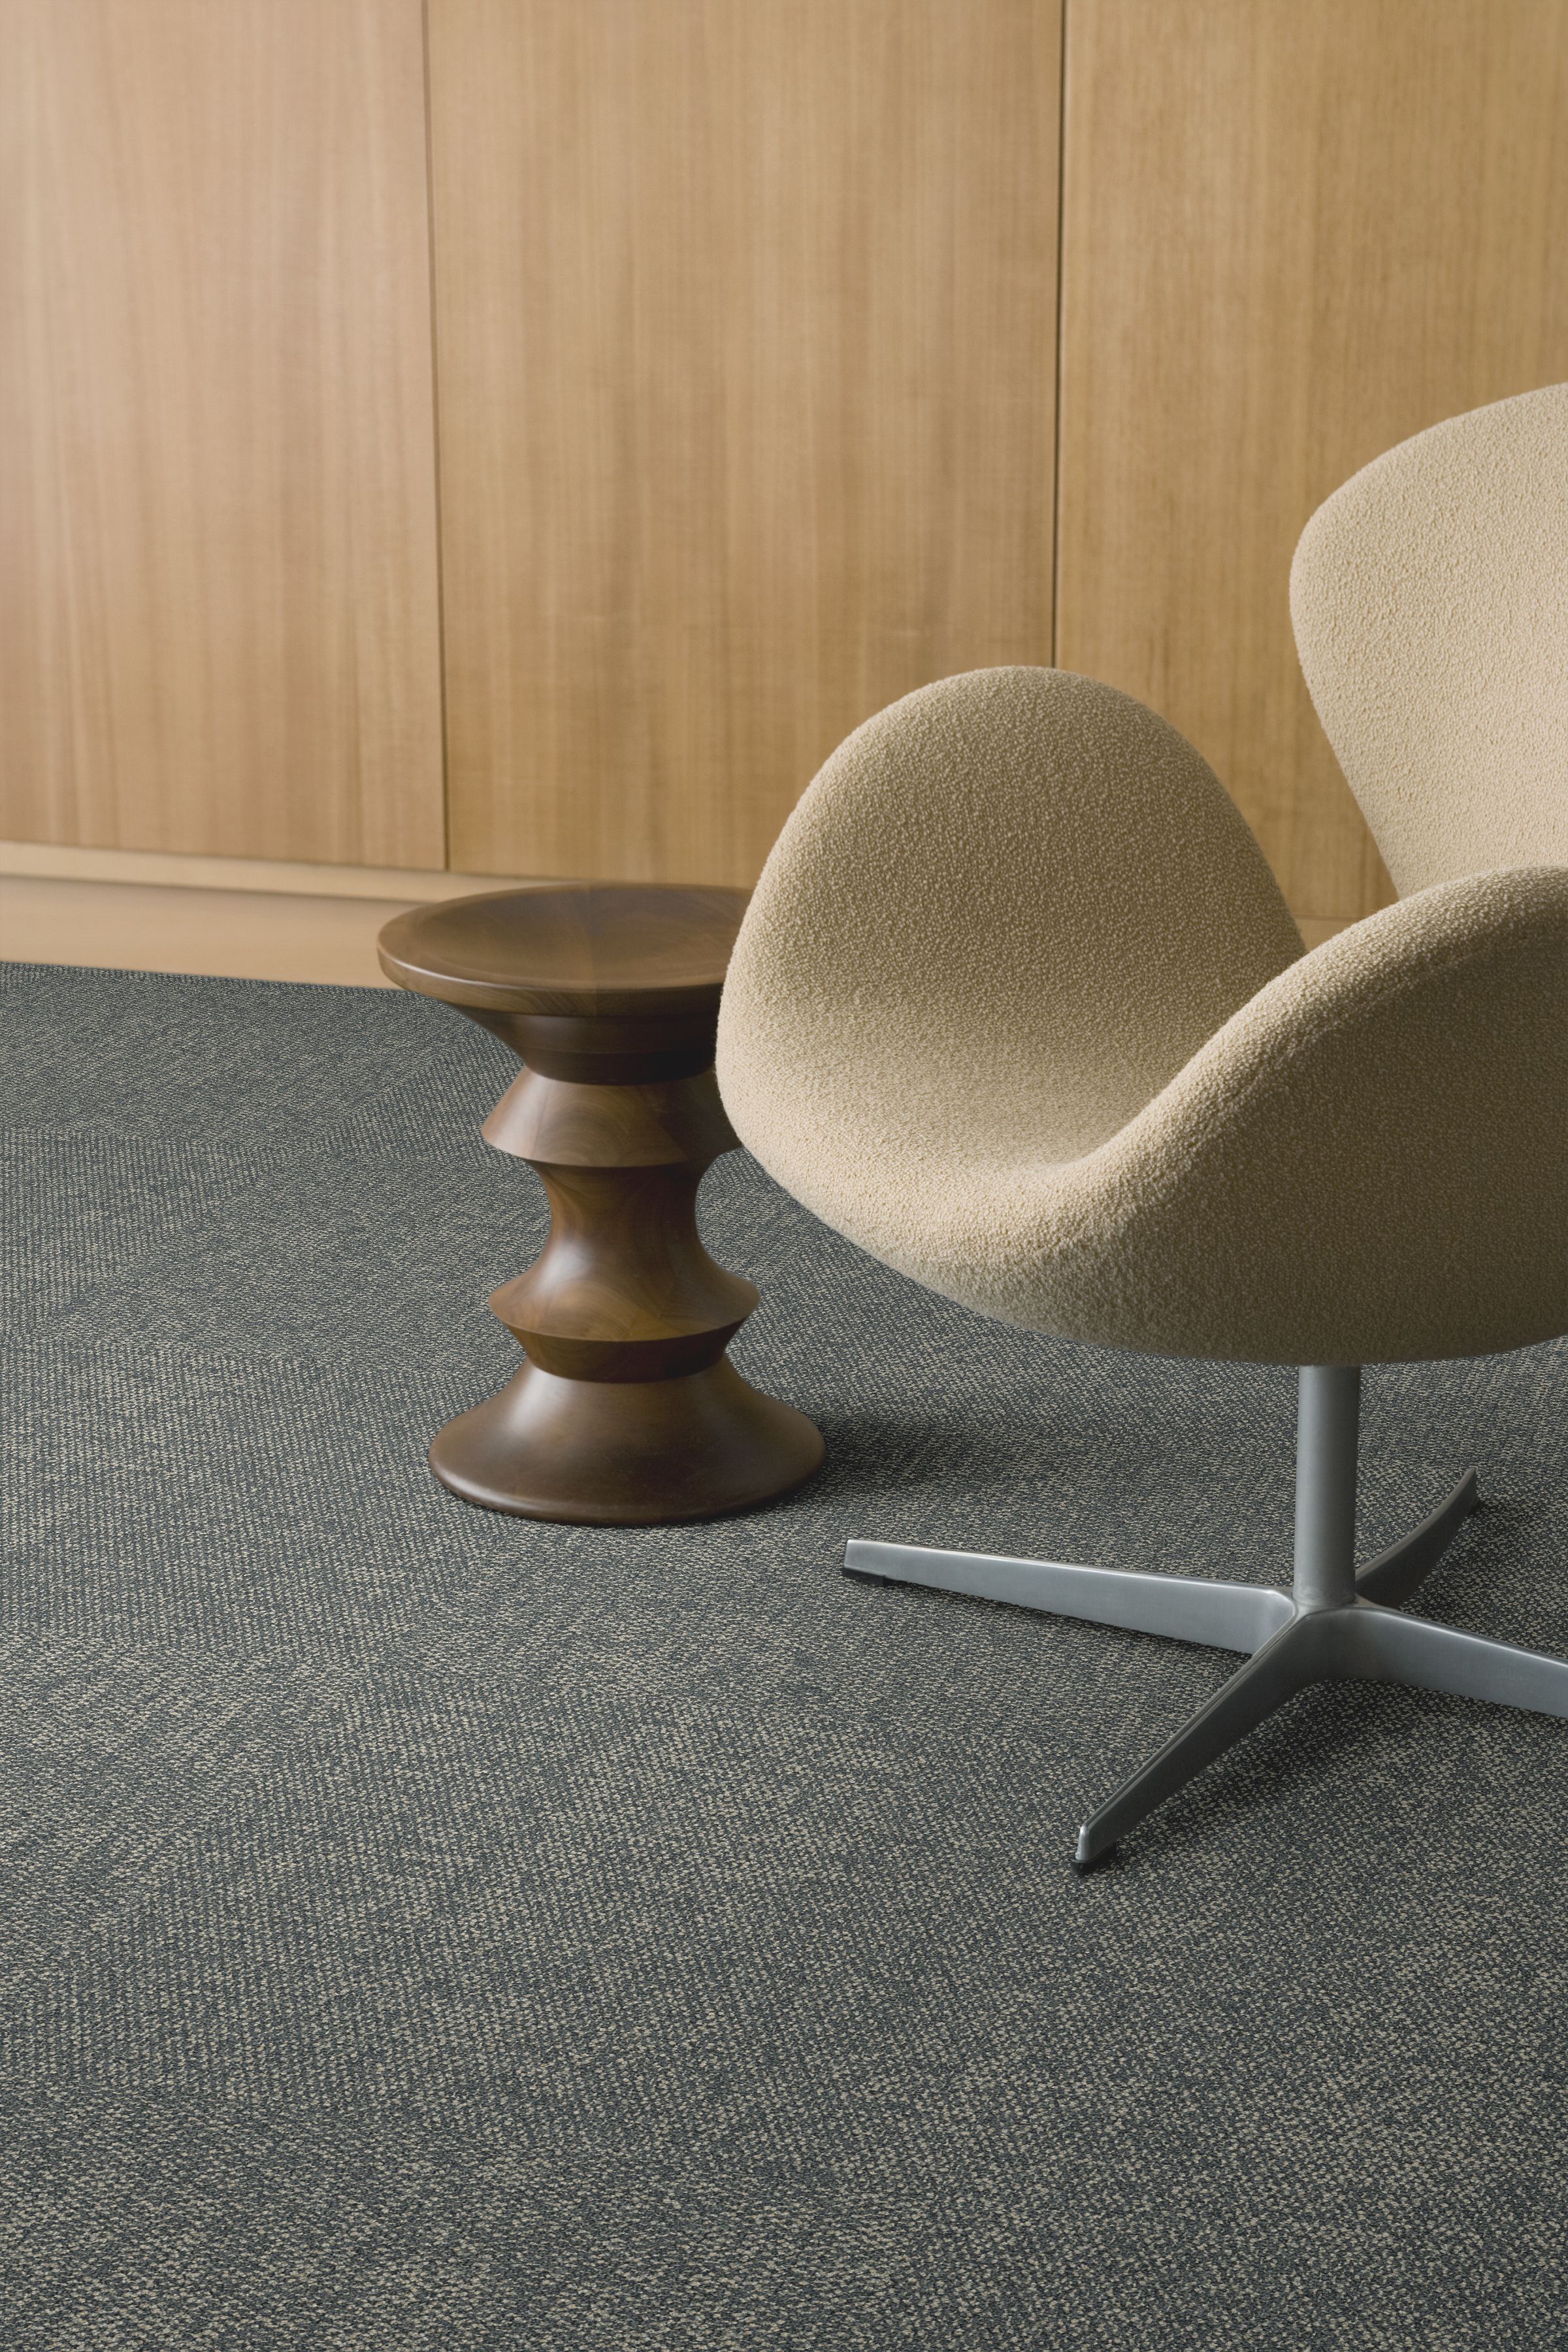 Detail of Interface Lighthearted carpet tile with chair and Eames stool imagen número 5